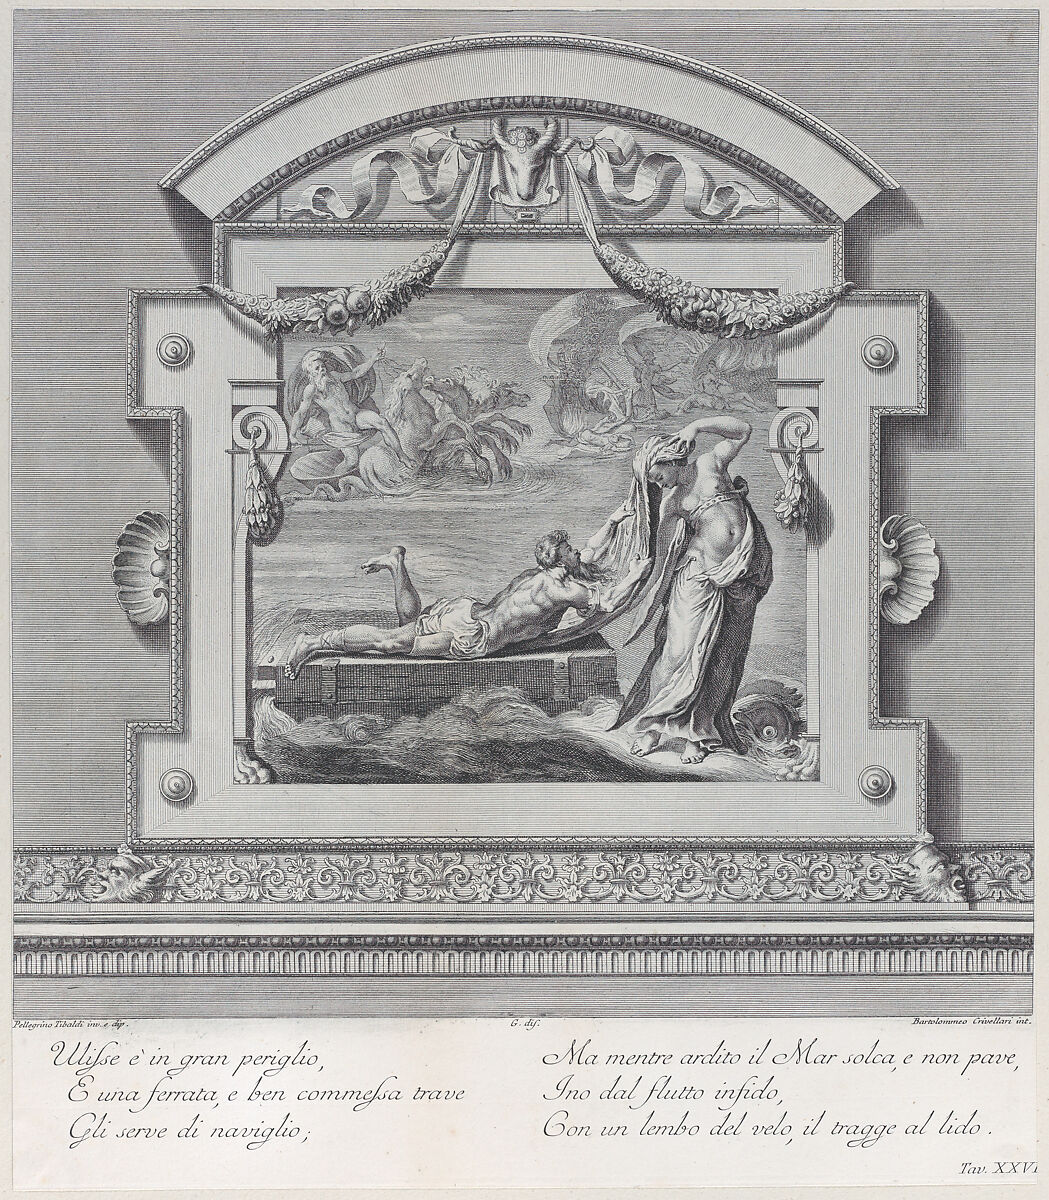 Plate 26: Ulysses escaping on a raft with the aid of the sea deity Leucothea, Bartolomeo Crivellari (Italian, active 18th century), Etching and engraving 